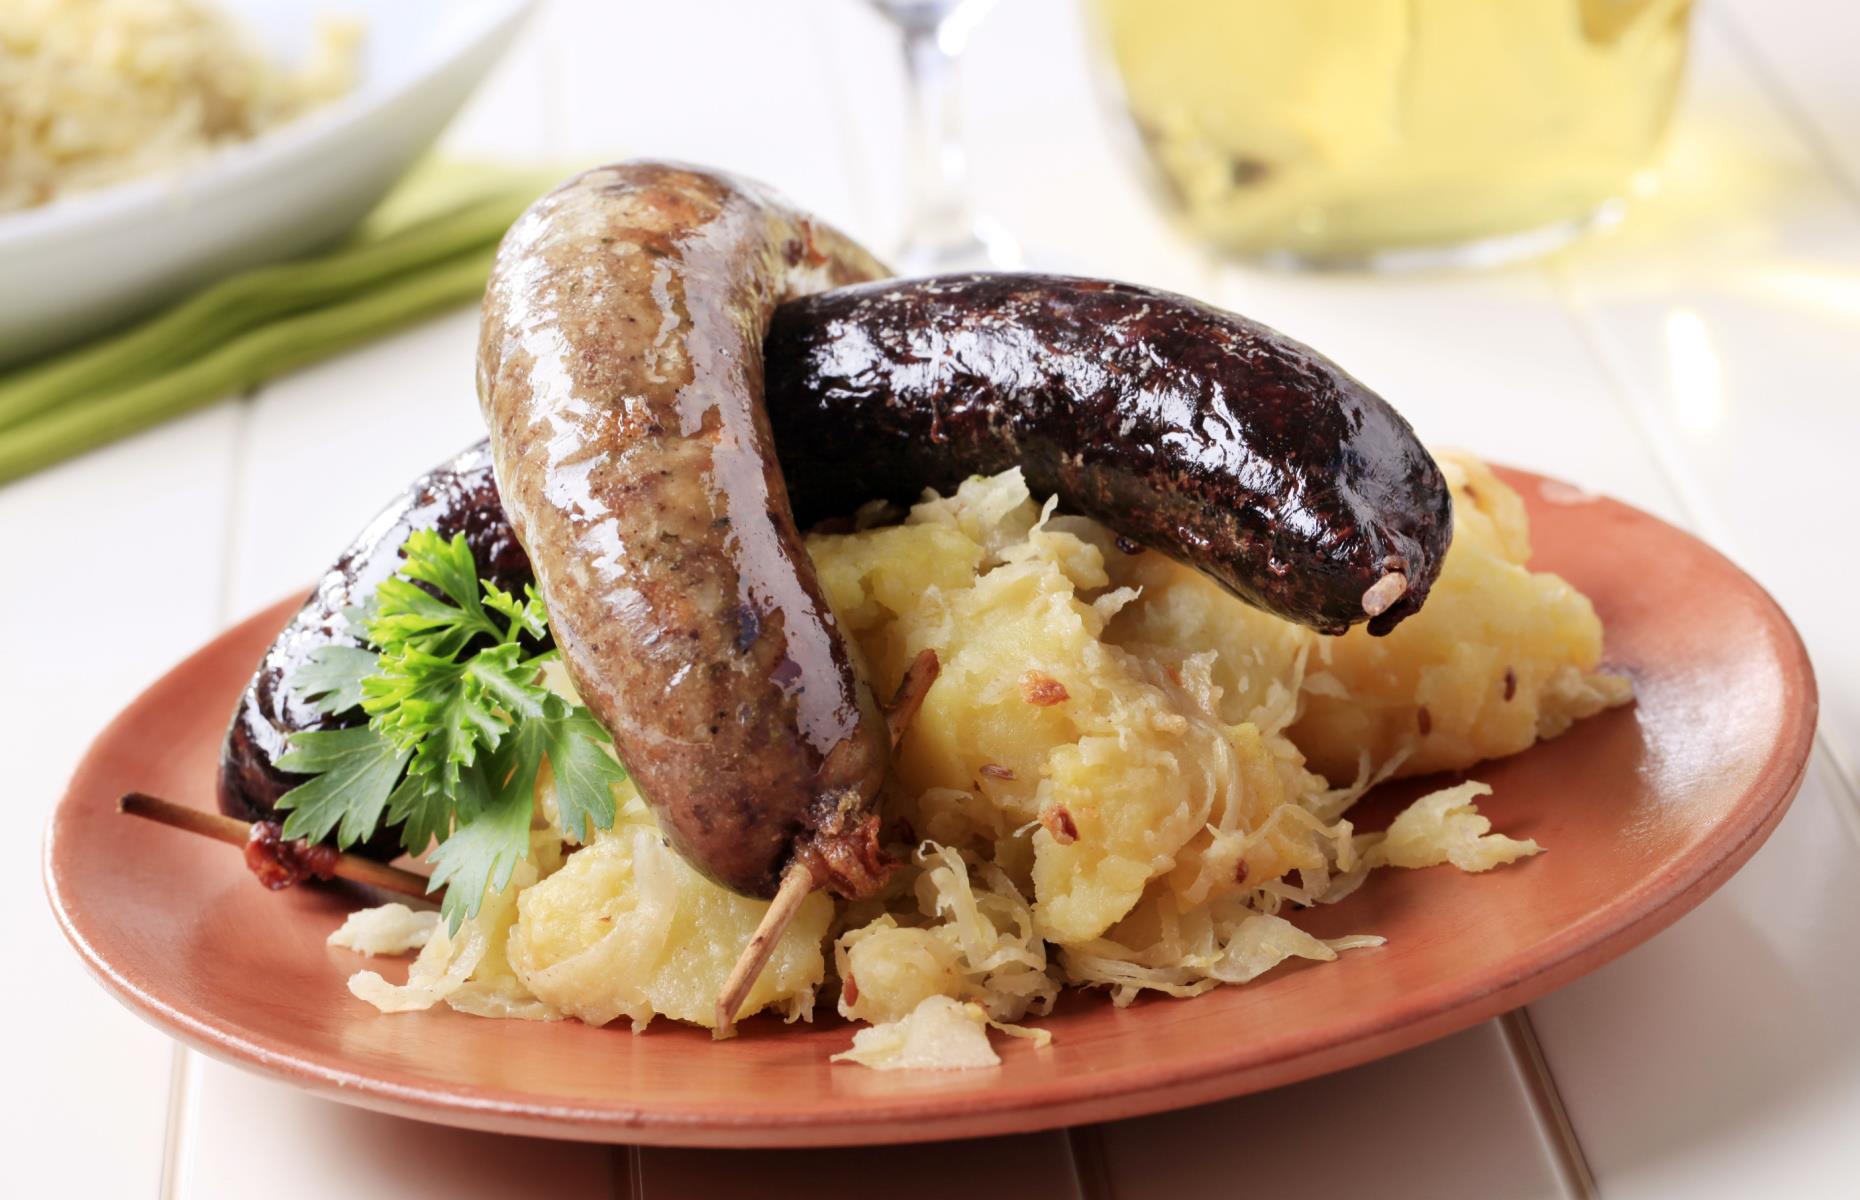 Traditional German food and recipes you need to try